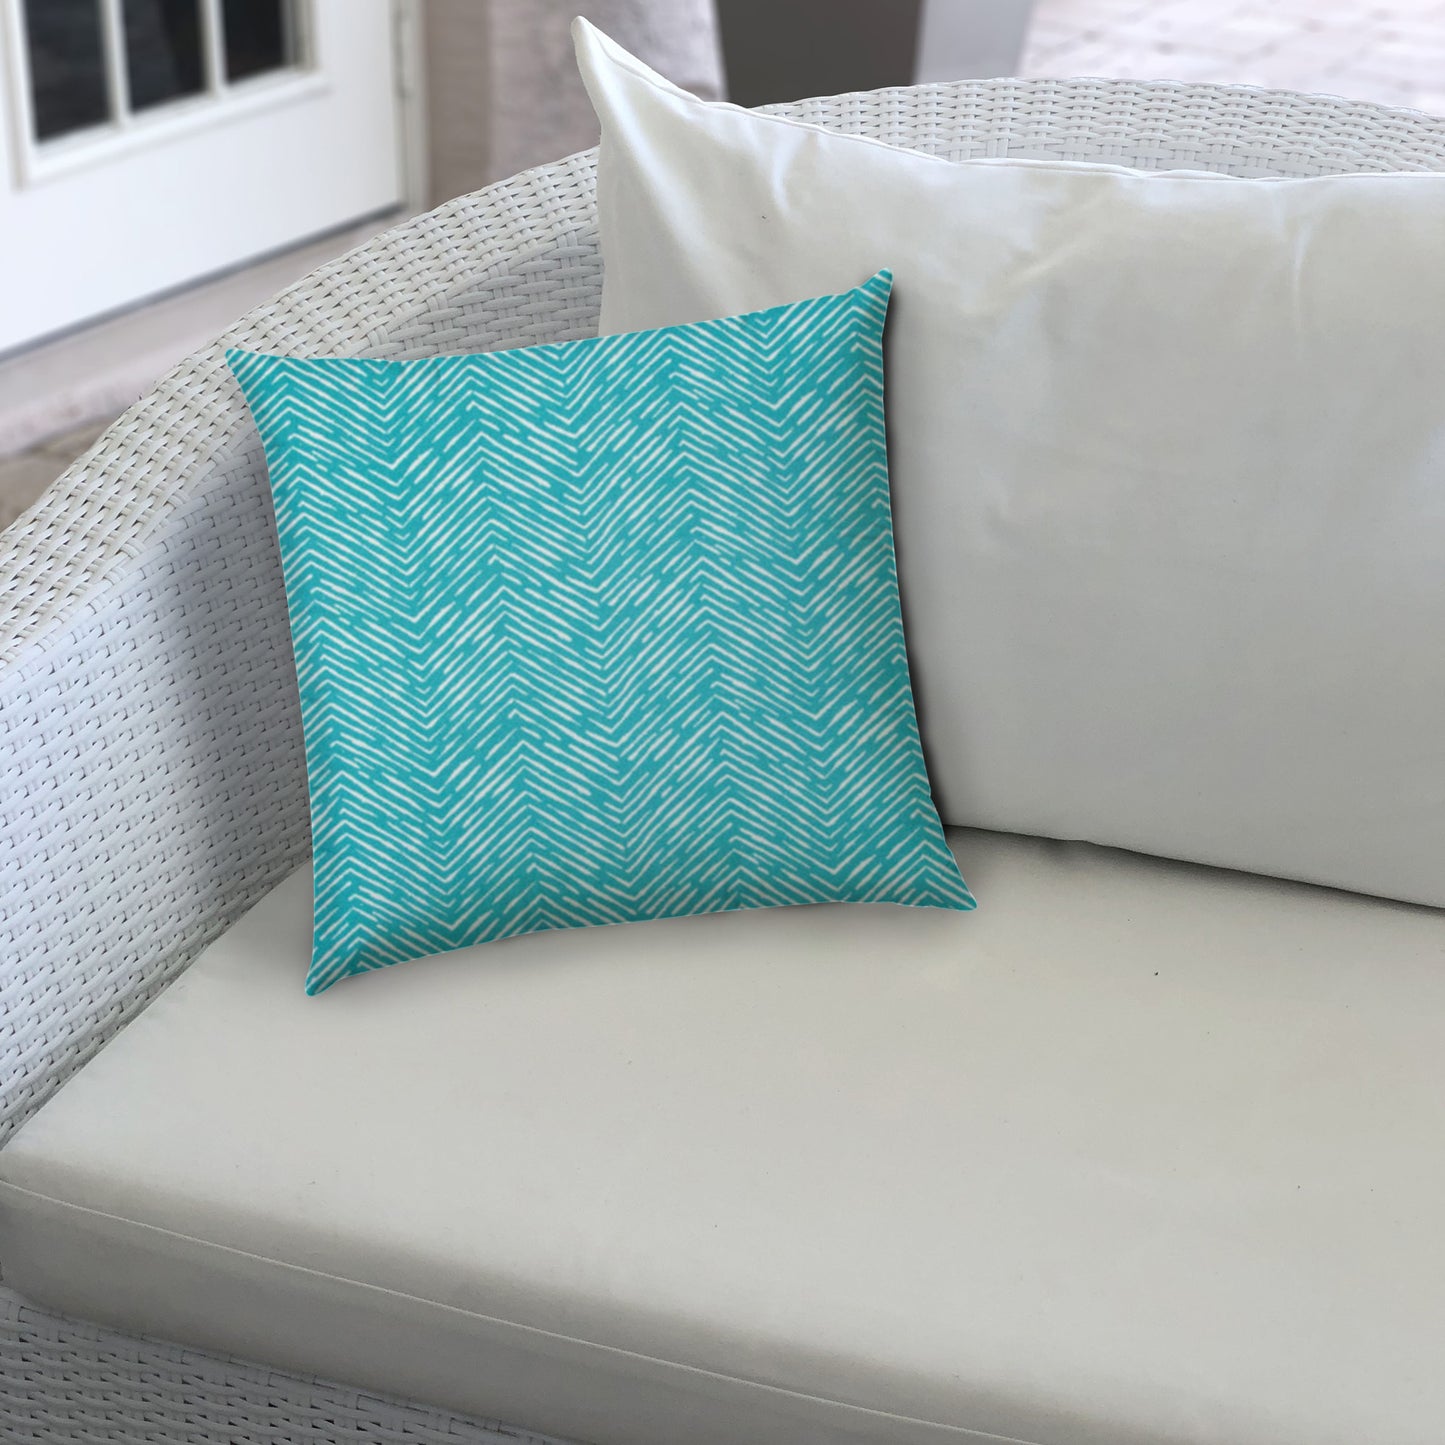 WATER WAVE Turquoise Indoor/Outdoor Pillow - Sewn Closure